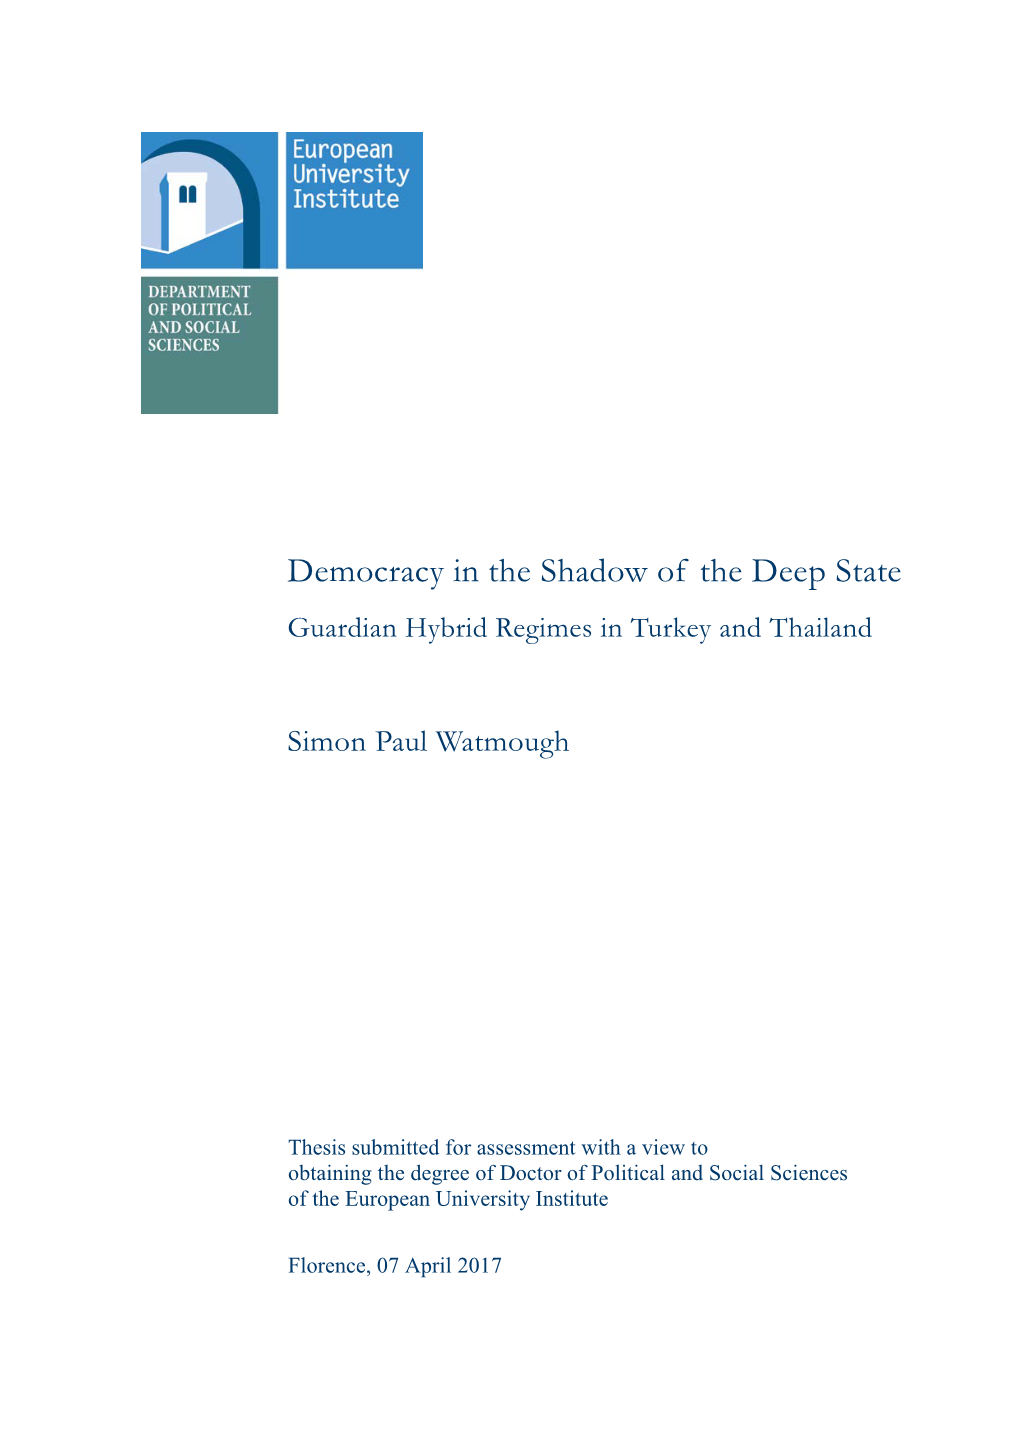 Democracy in the Shadow of the Deep State Guardian Hybrid Regimes in Turkey and Thailand